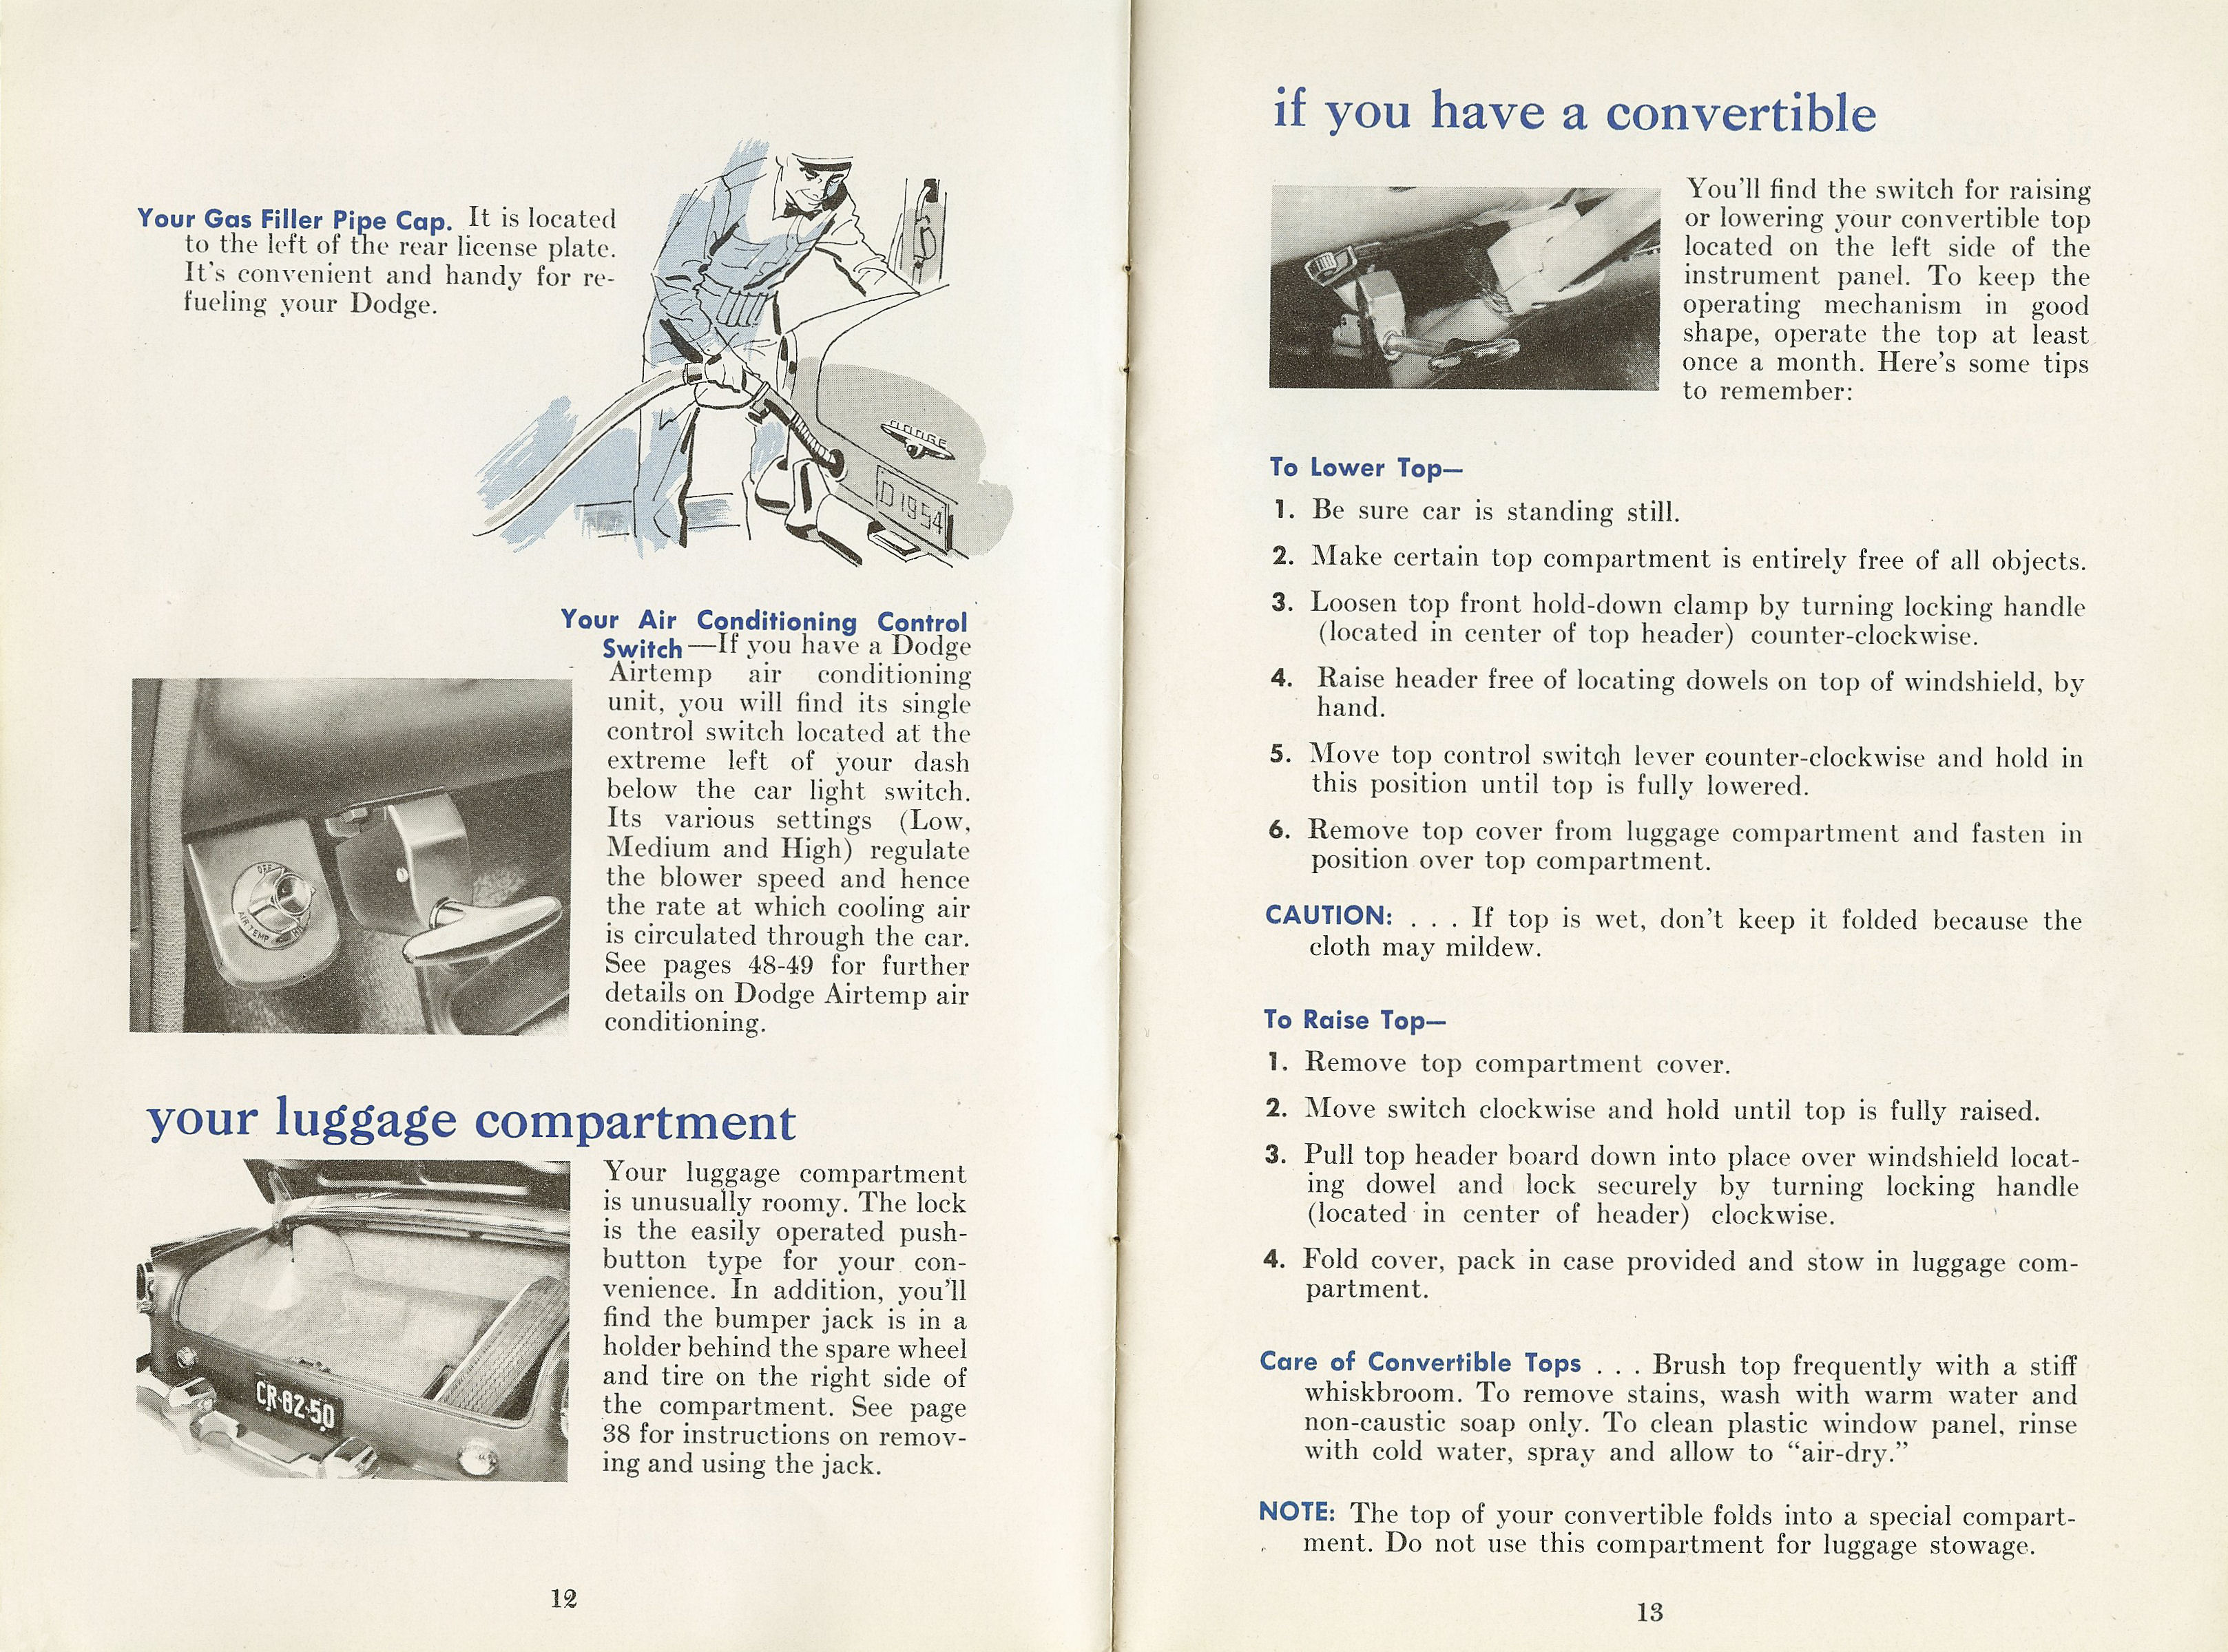 1954 Dodge Car Owners Manual Page 24